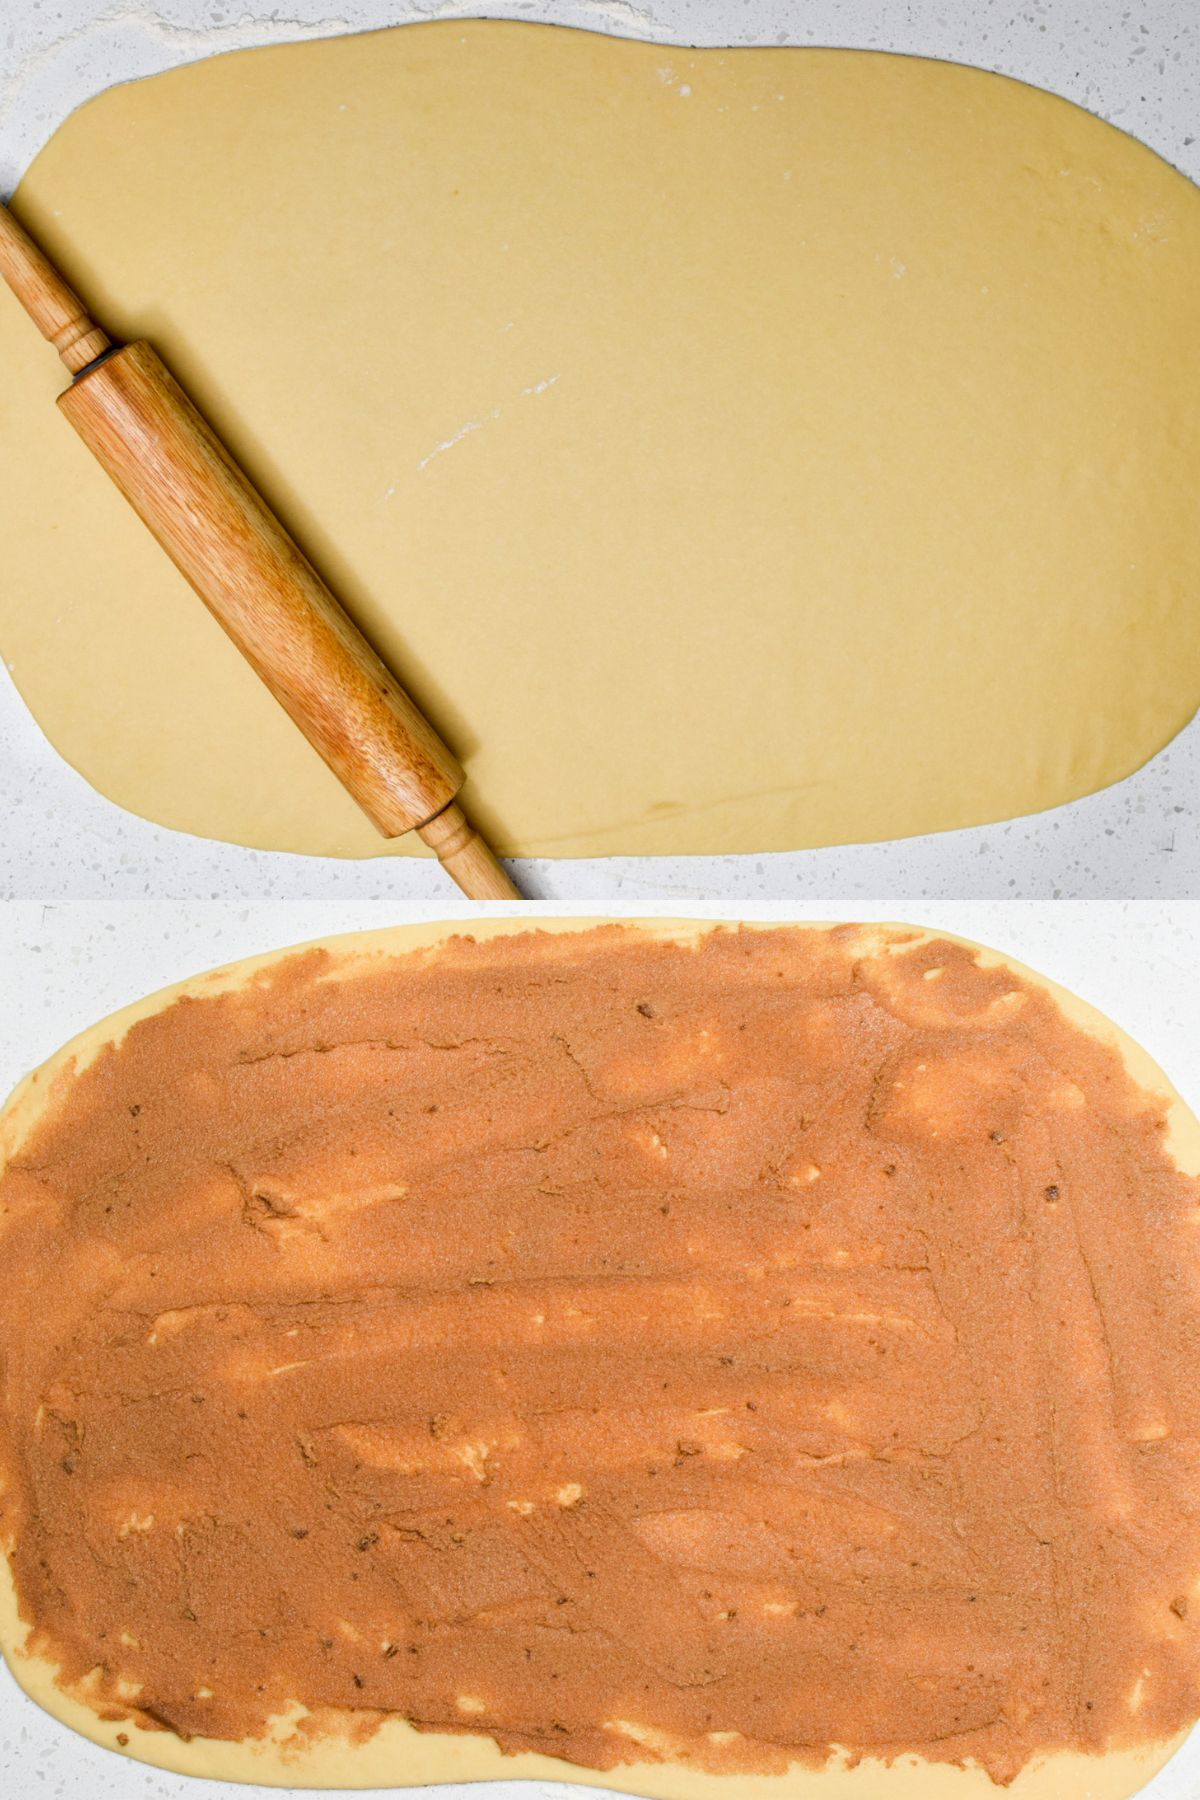 A rolling pin on rolled out dough and cinnamon sugar filling spread on the dough.